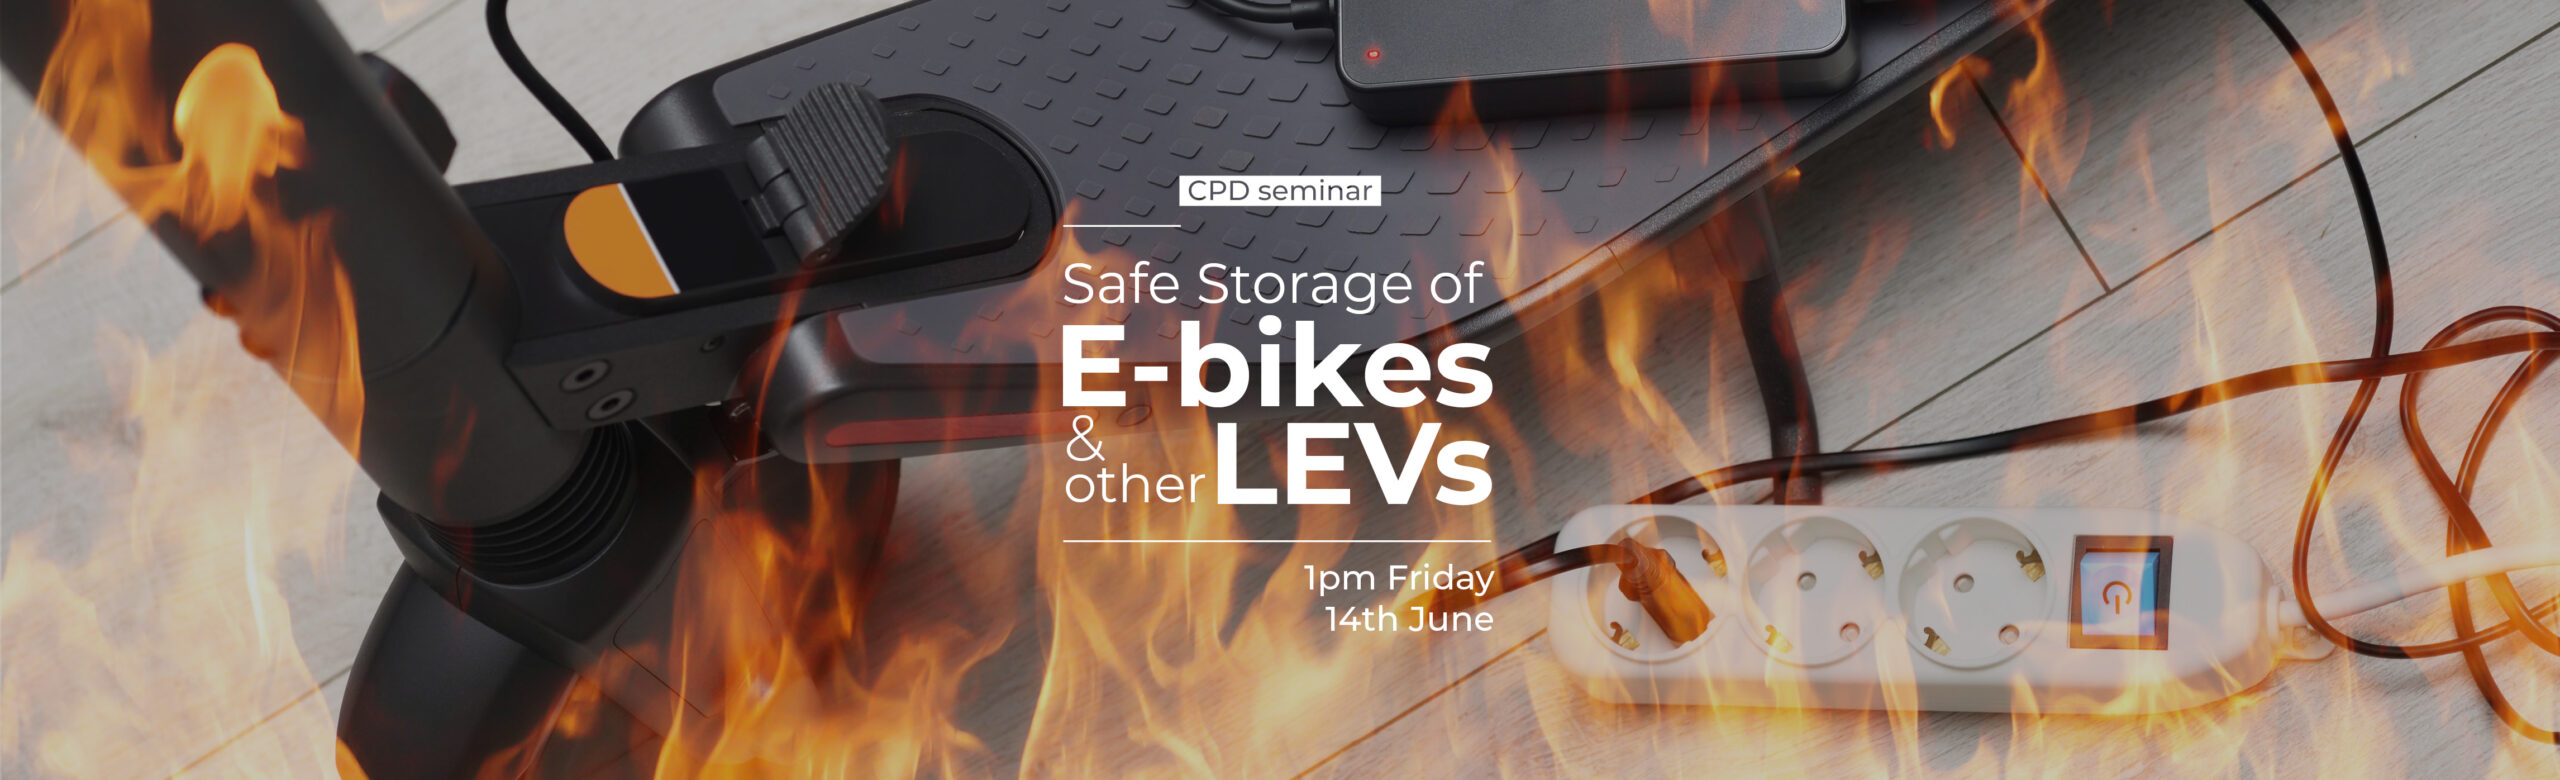 CPD on Safe Storage of E-bikes and other LEVs